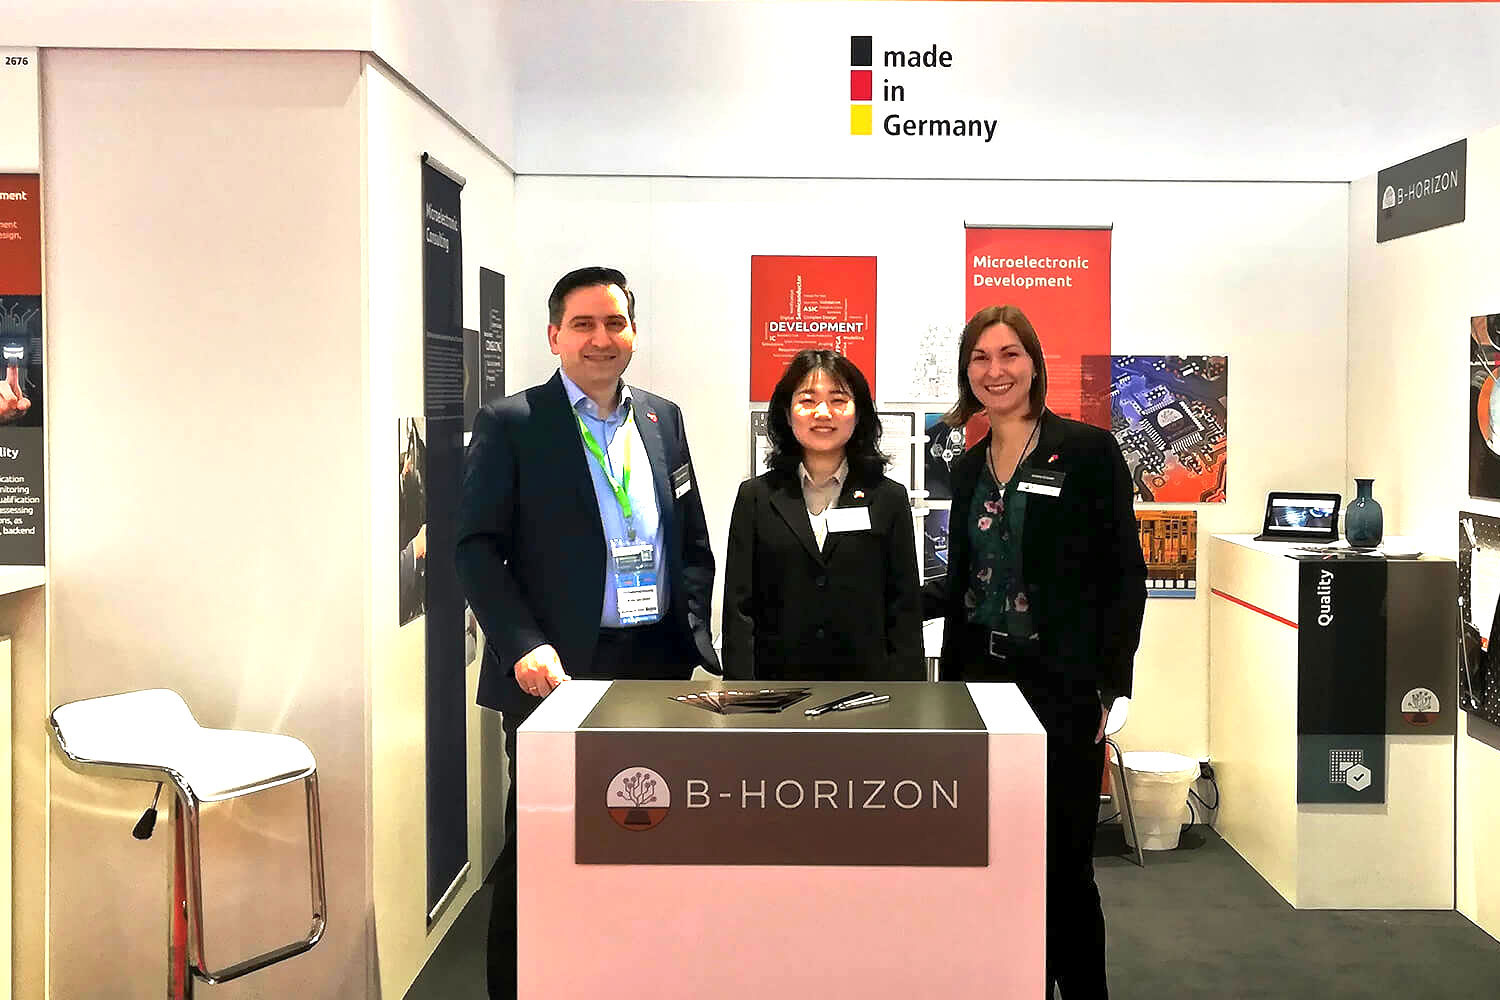 B-Horizon founder and CEO Mohammad Kabany together with Helena Krämer (Executive Management Assistant) and a English-Chinese translator at B-Horizon’s own booth at the SEMICON China in Shanghai.